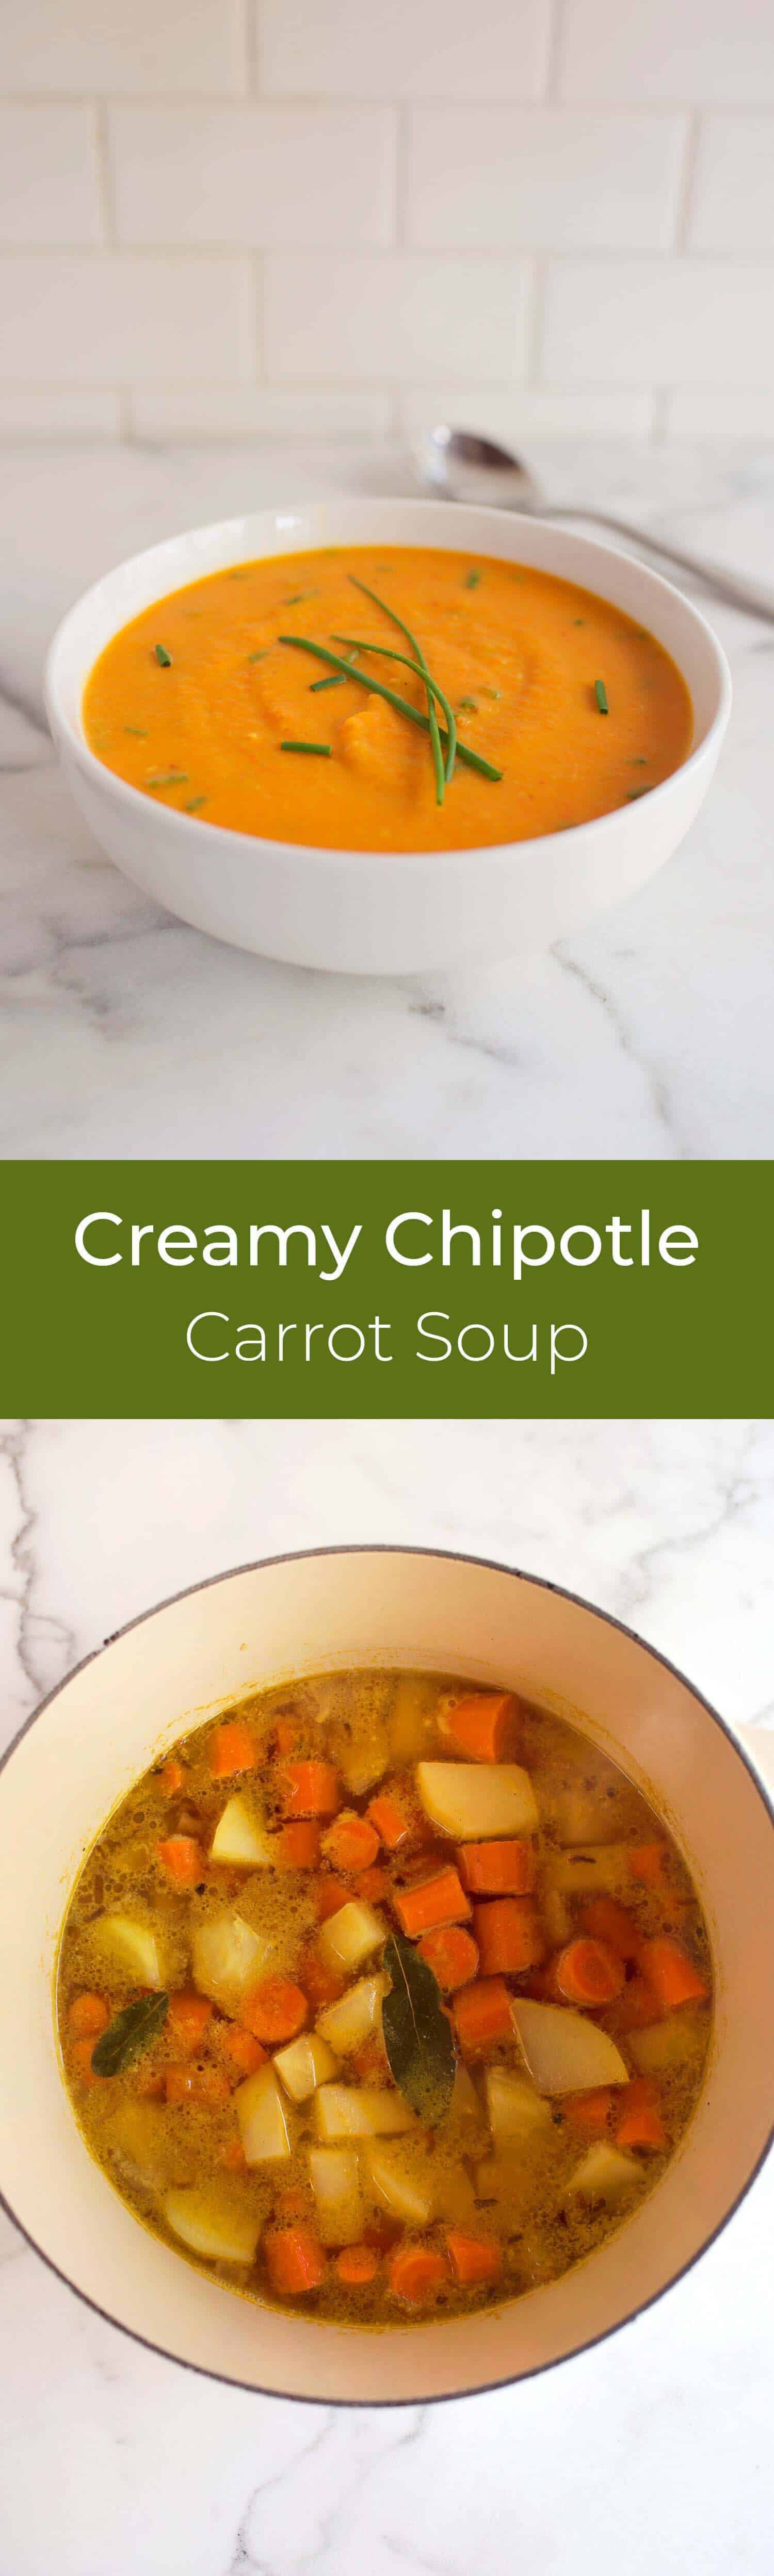 easy creamy chipotle carrot soup